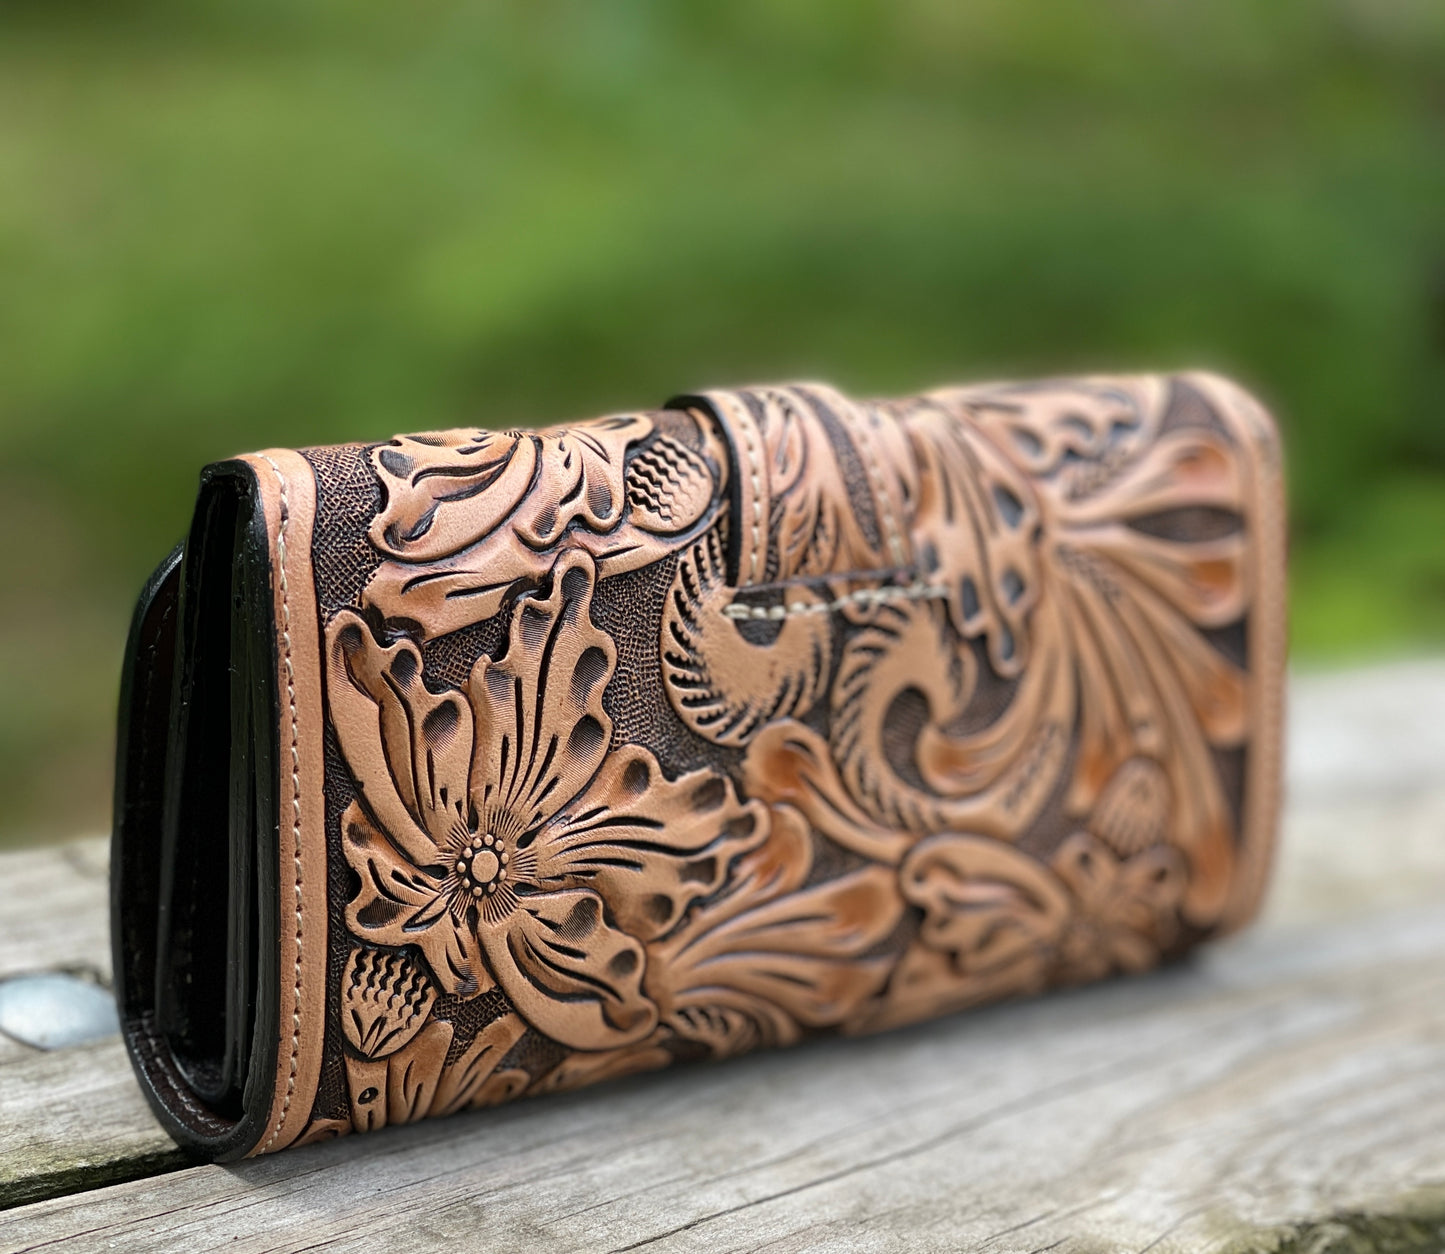 Hand Tooled Leather Wallet, "WALLET BOTON" by ALLE - ALLE Handbags